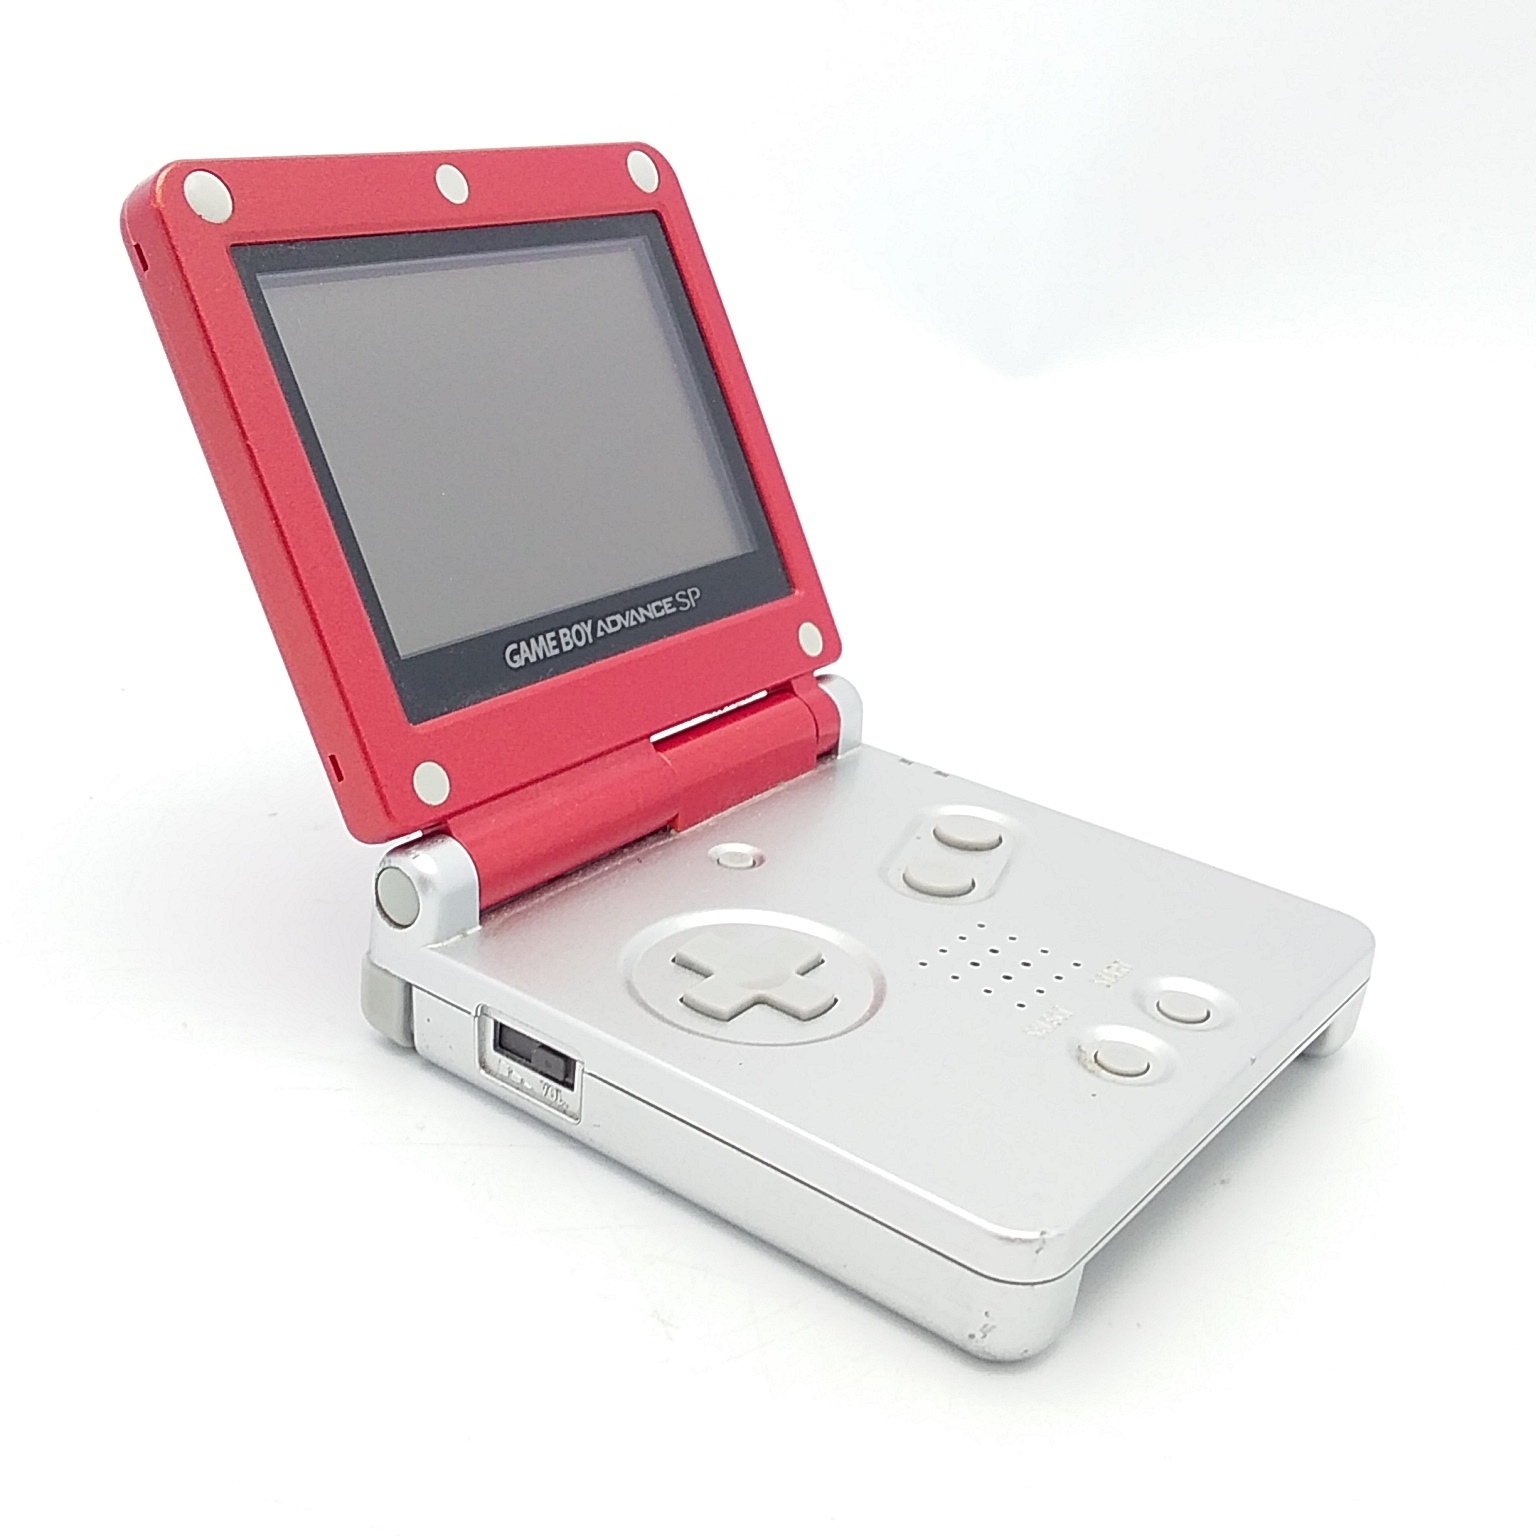 Foto van Game Boy Advance SP Mario Limited Edition - Nette Staat